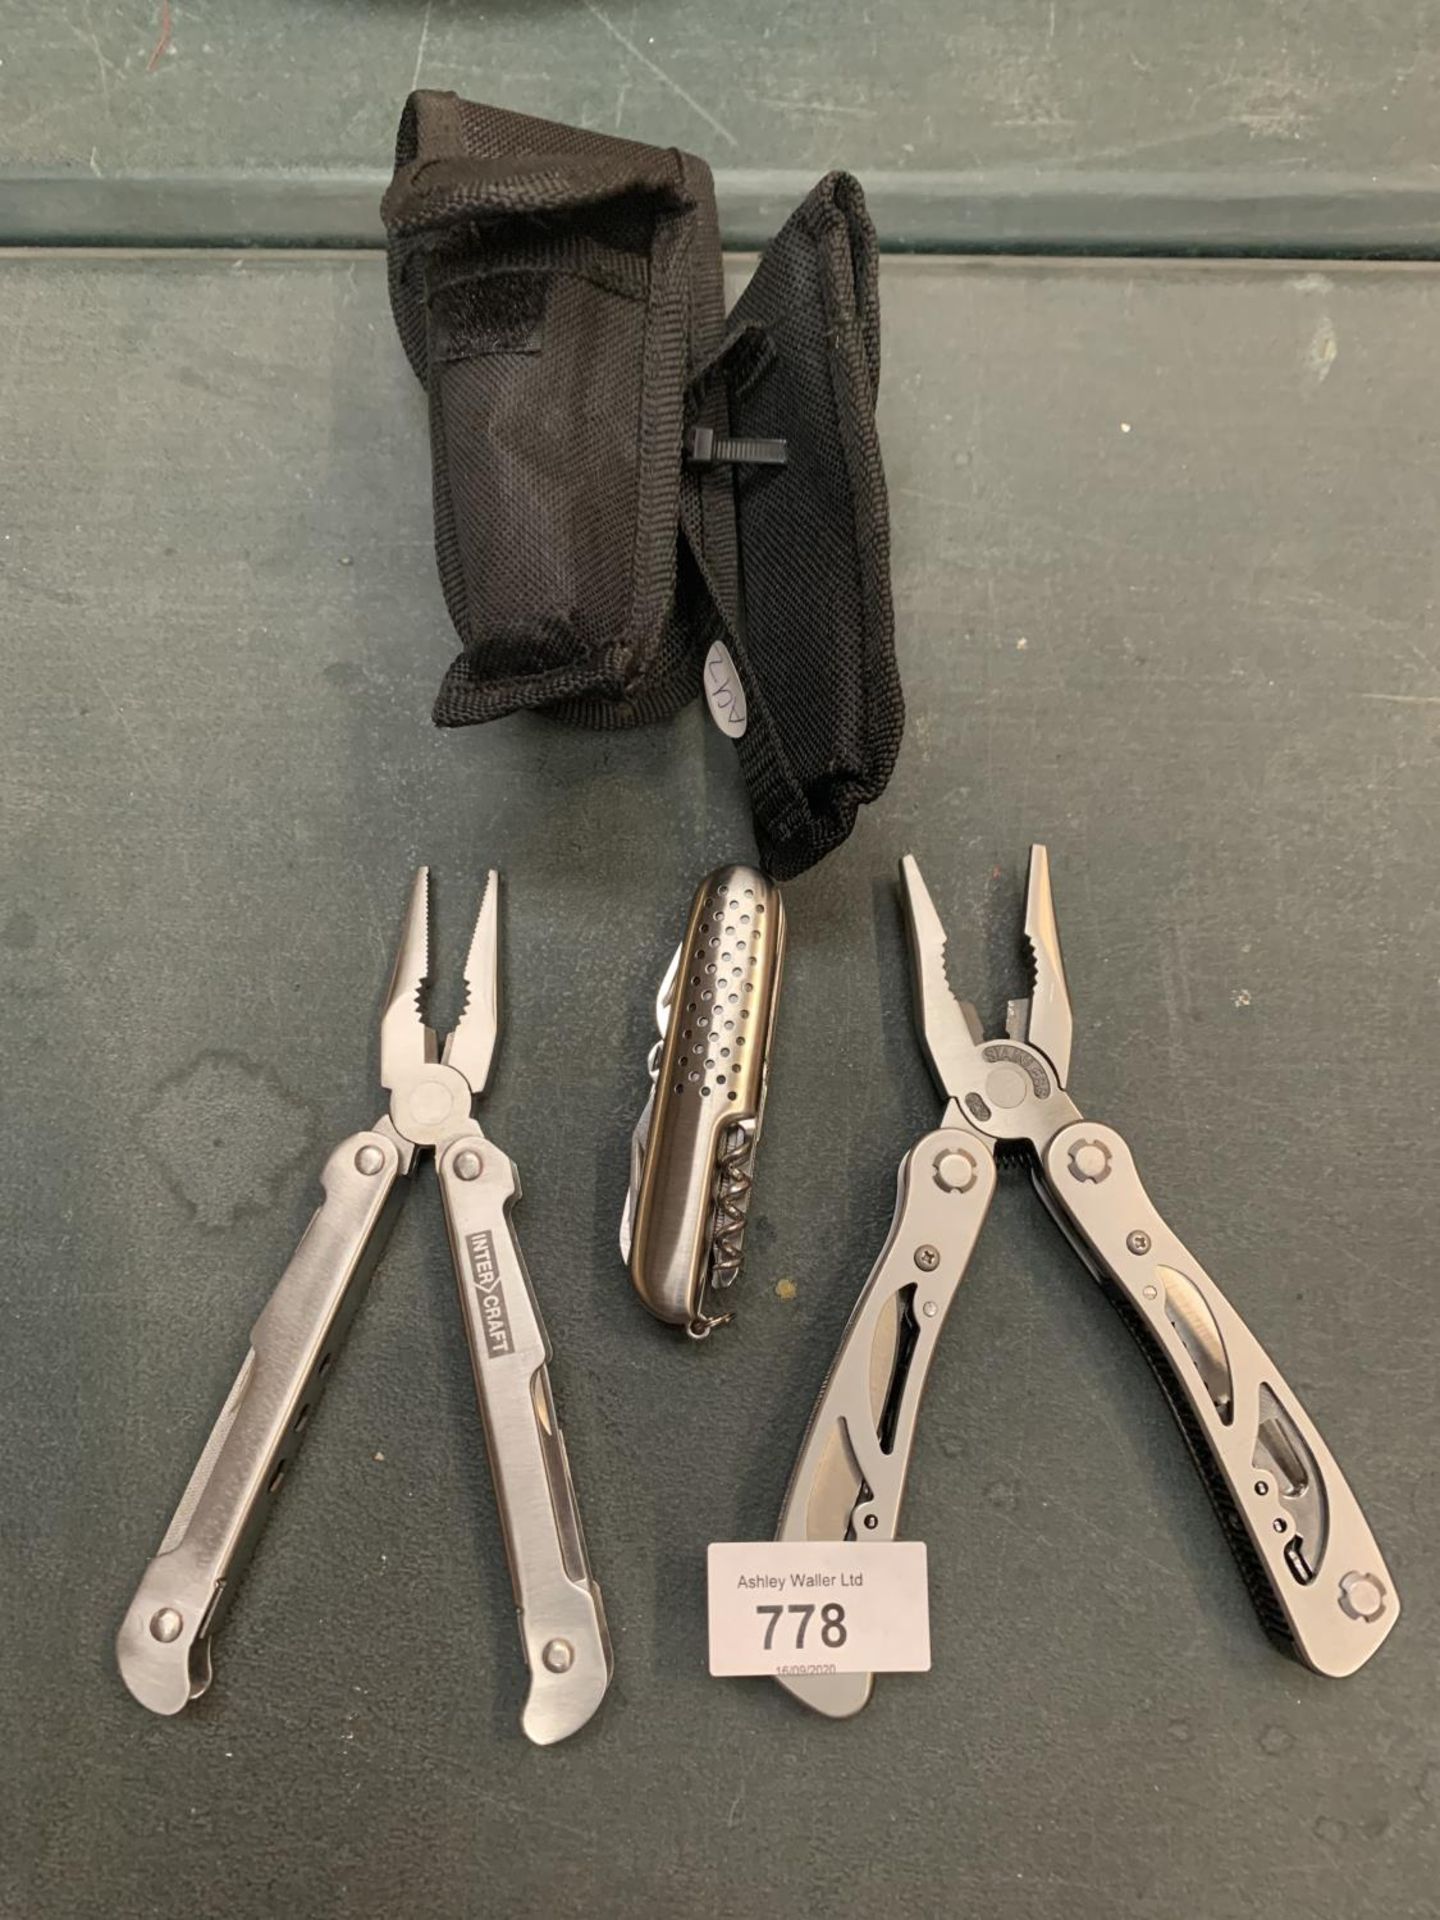 THREE CASED ITEMS TO INCLUDE AN INTERCRAFT MULTI TOOL, A FIX IT MULTI TOOL AND A PENKNIFE